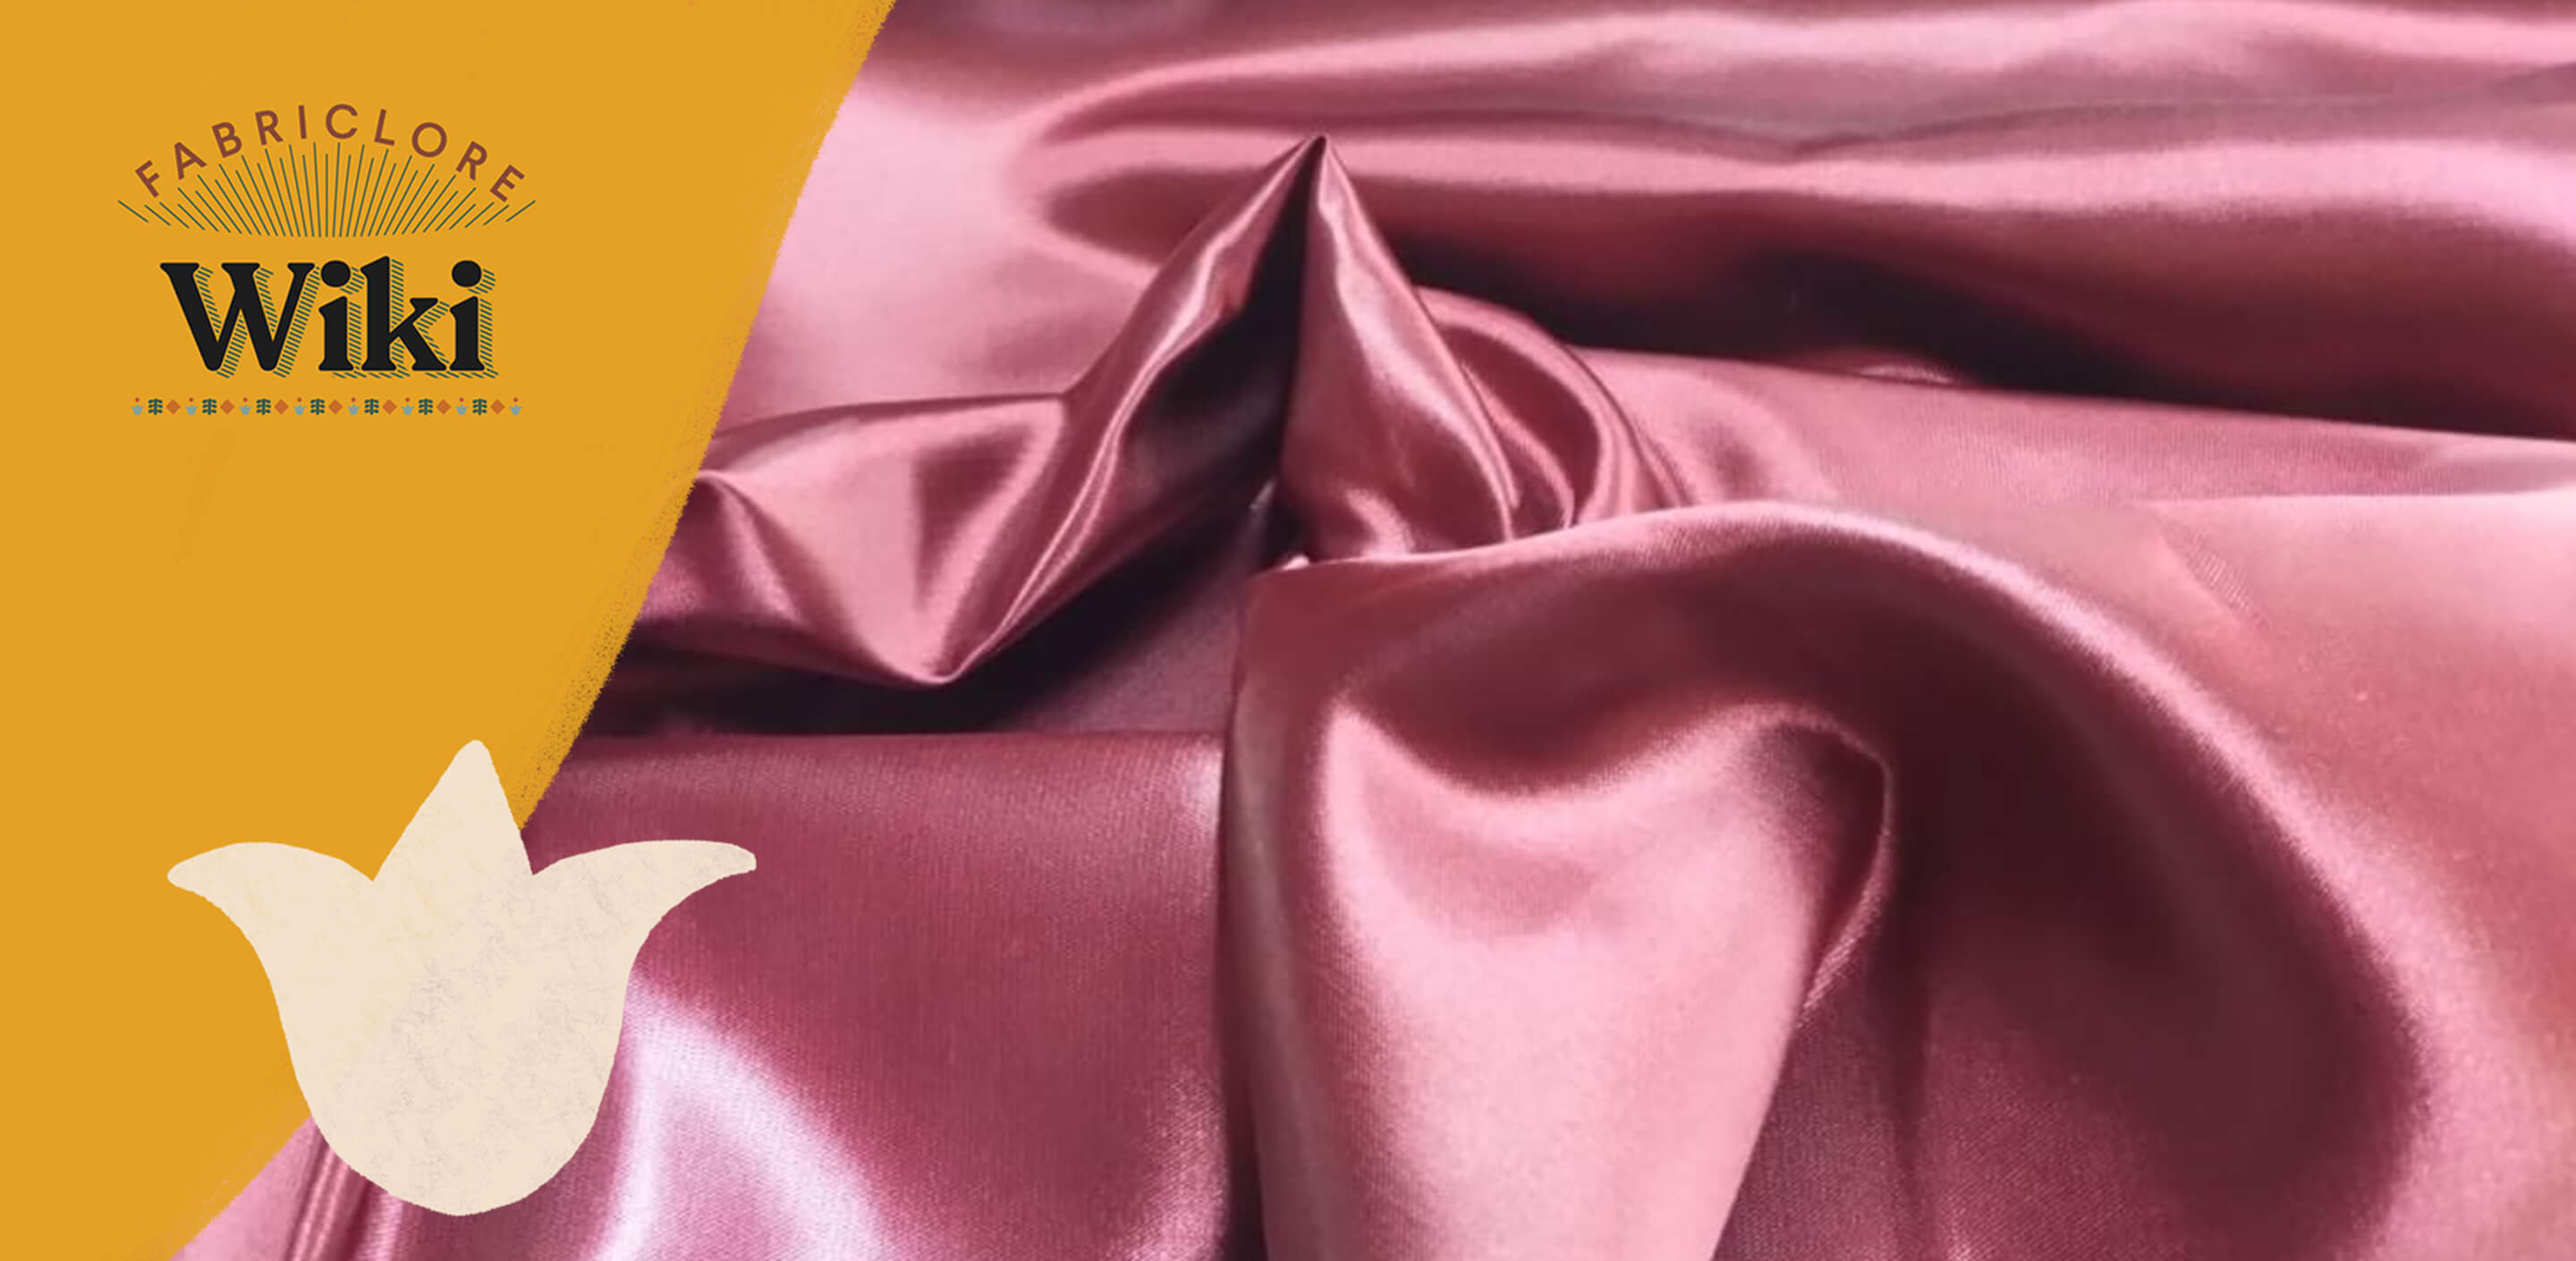 The History and Benefits of Jersey Fabric - Fabriclore